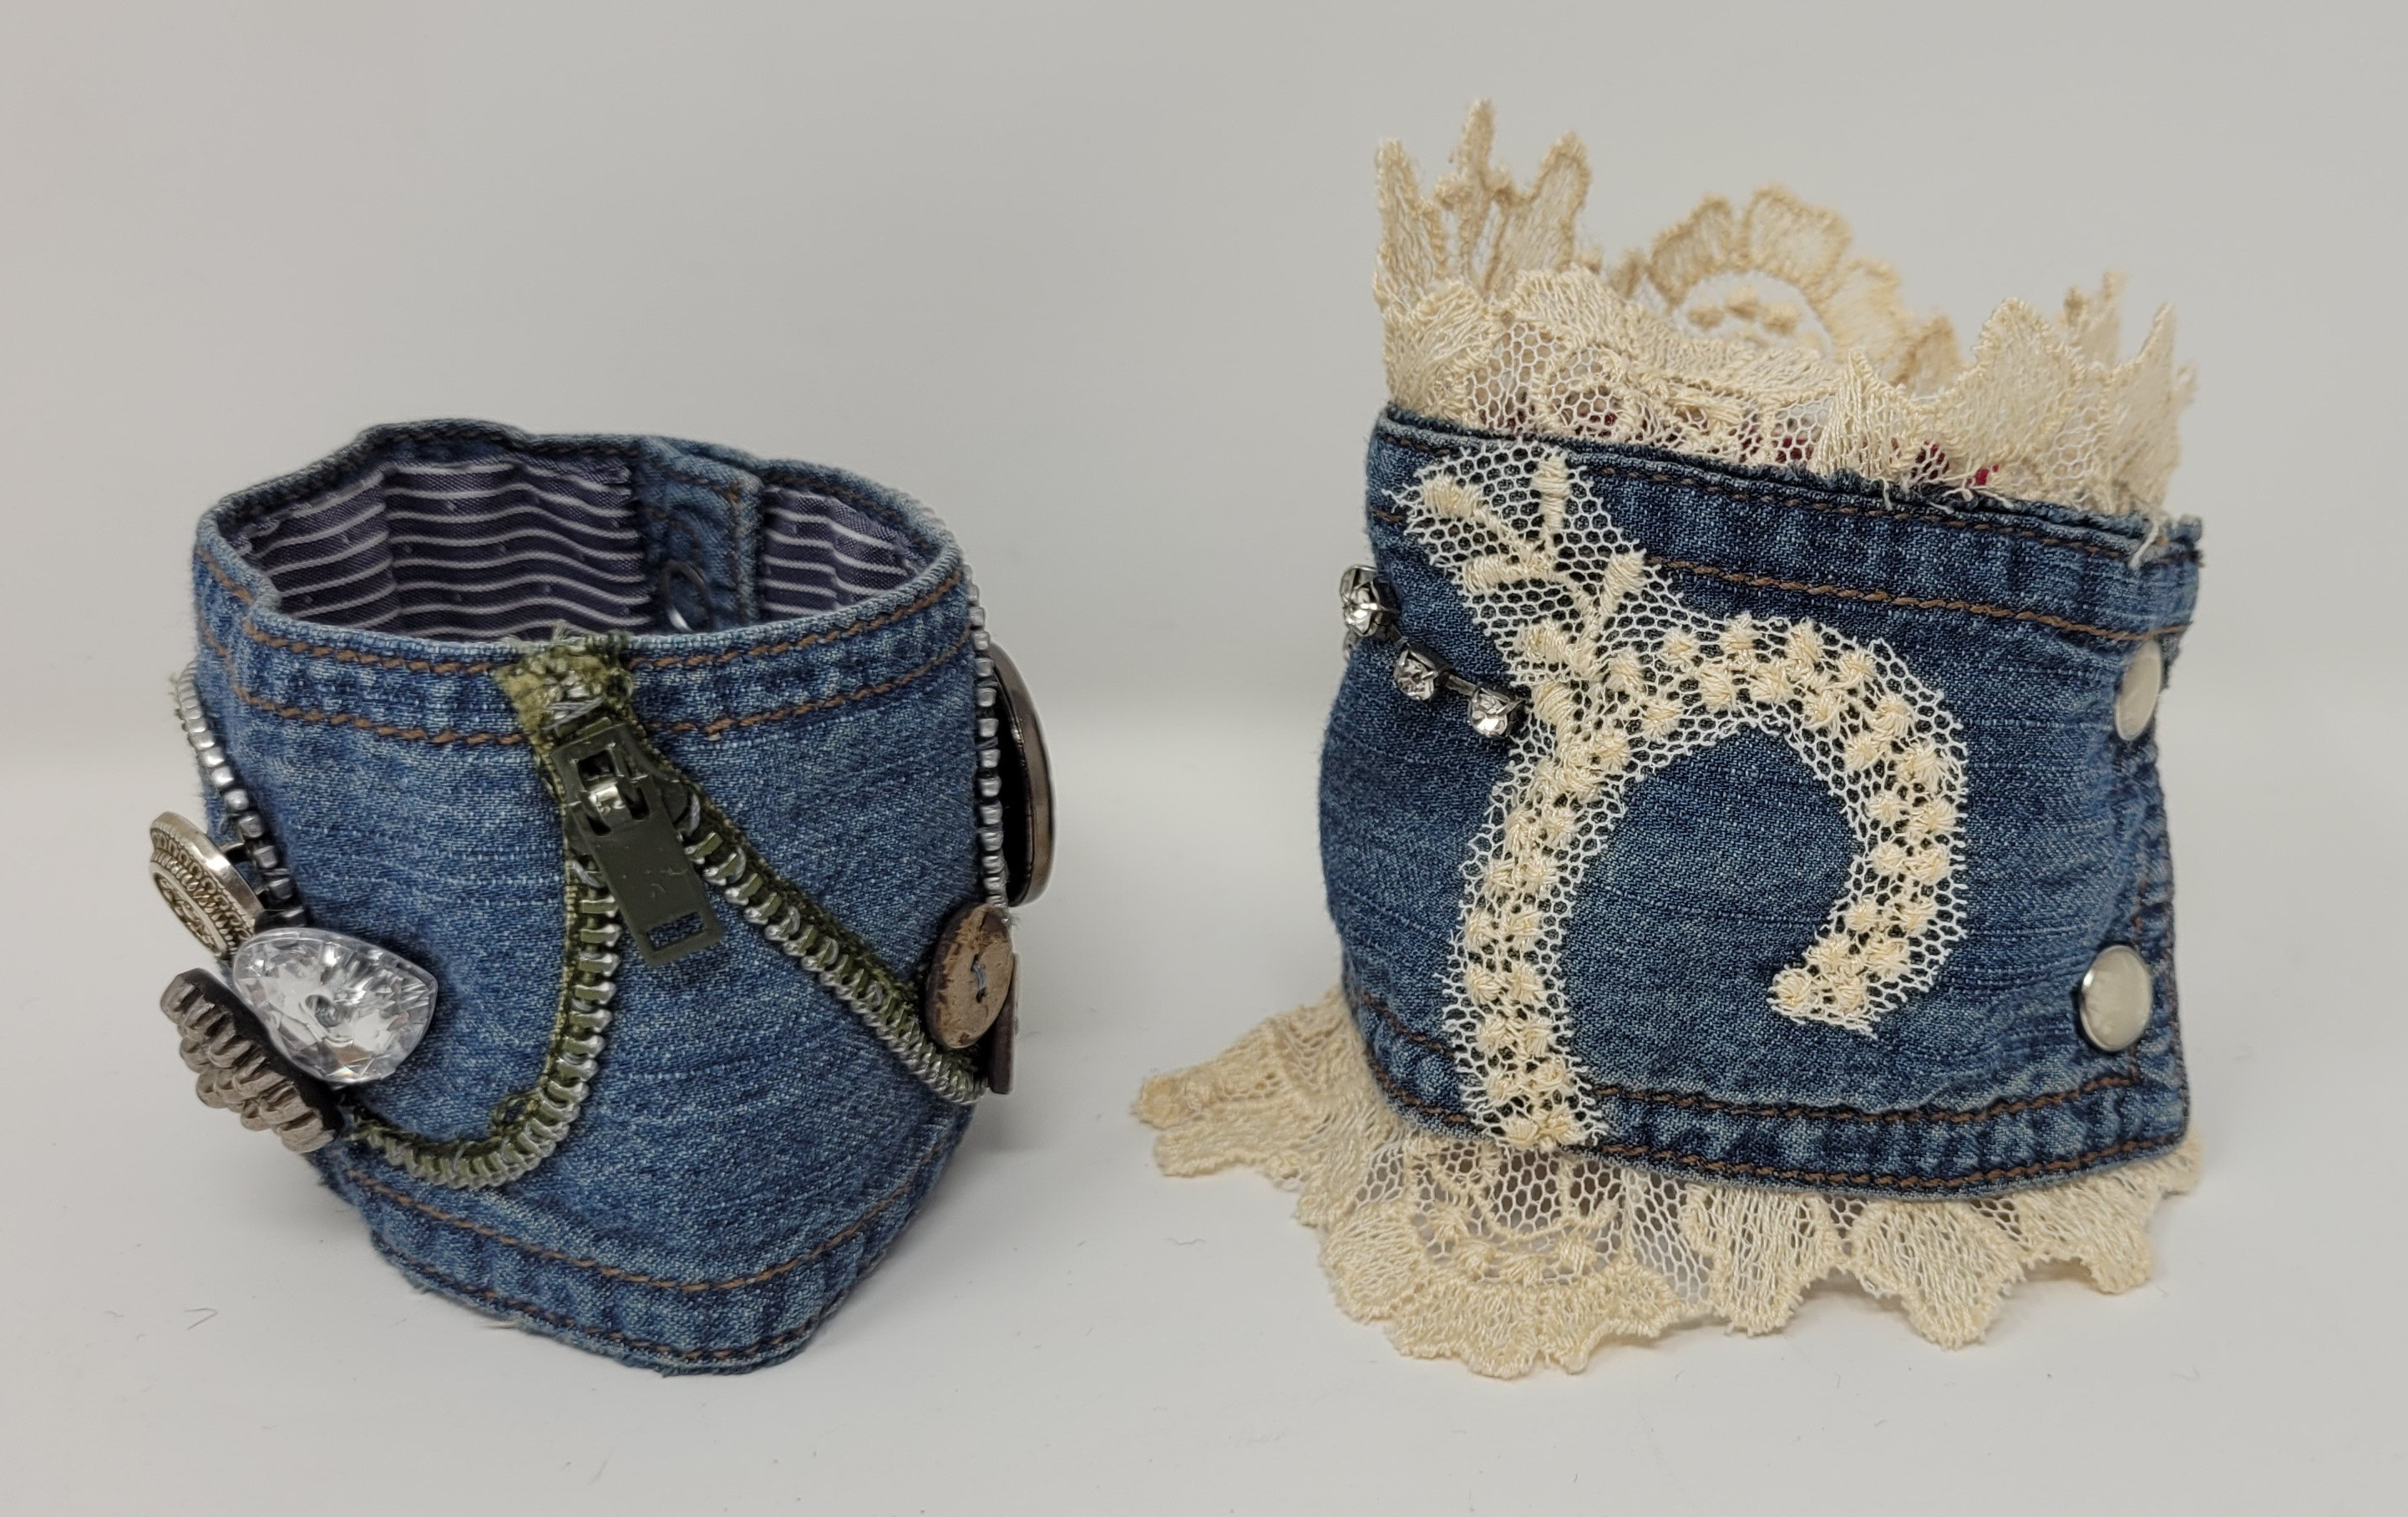 Hand Sewn Wrist Cuffs From Recycled Fabric